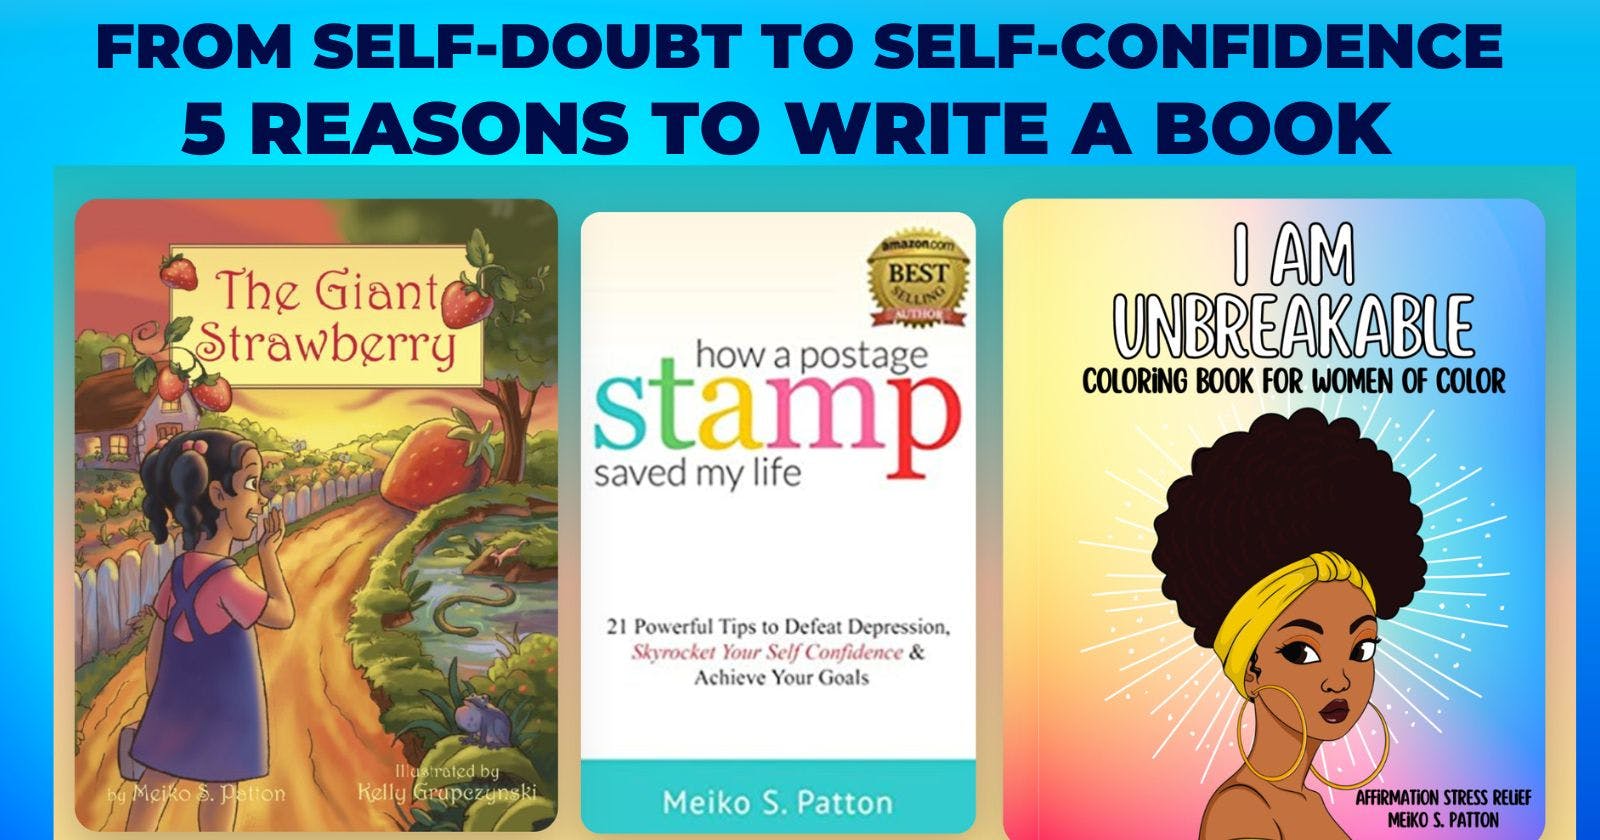 From Self-Doubt to Self-Confidence: How Writing a Book Can Help You Believe in Yourself